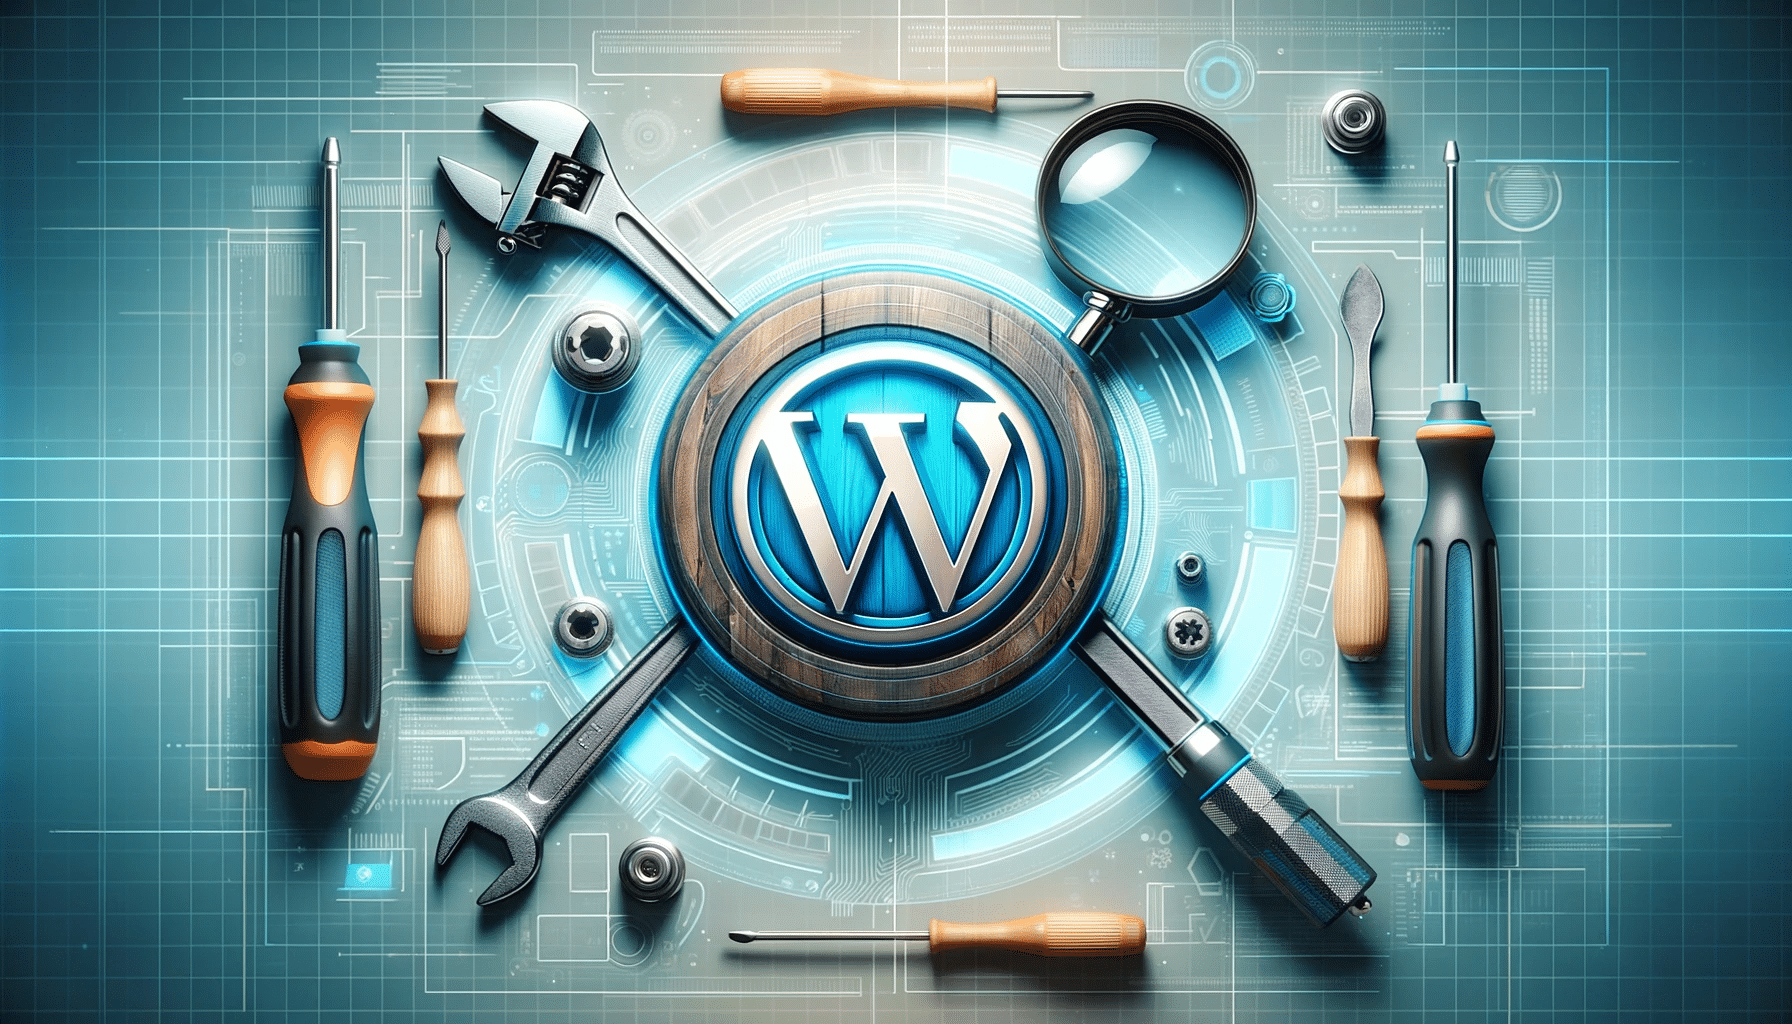 A blue WordPress logo is in the center surrounded by repair tools.